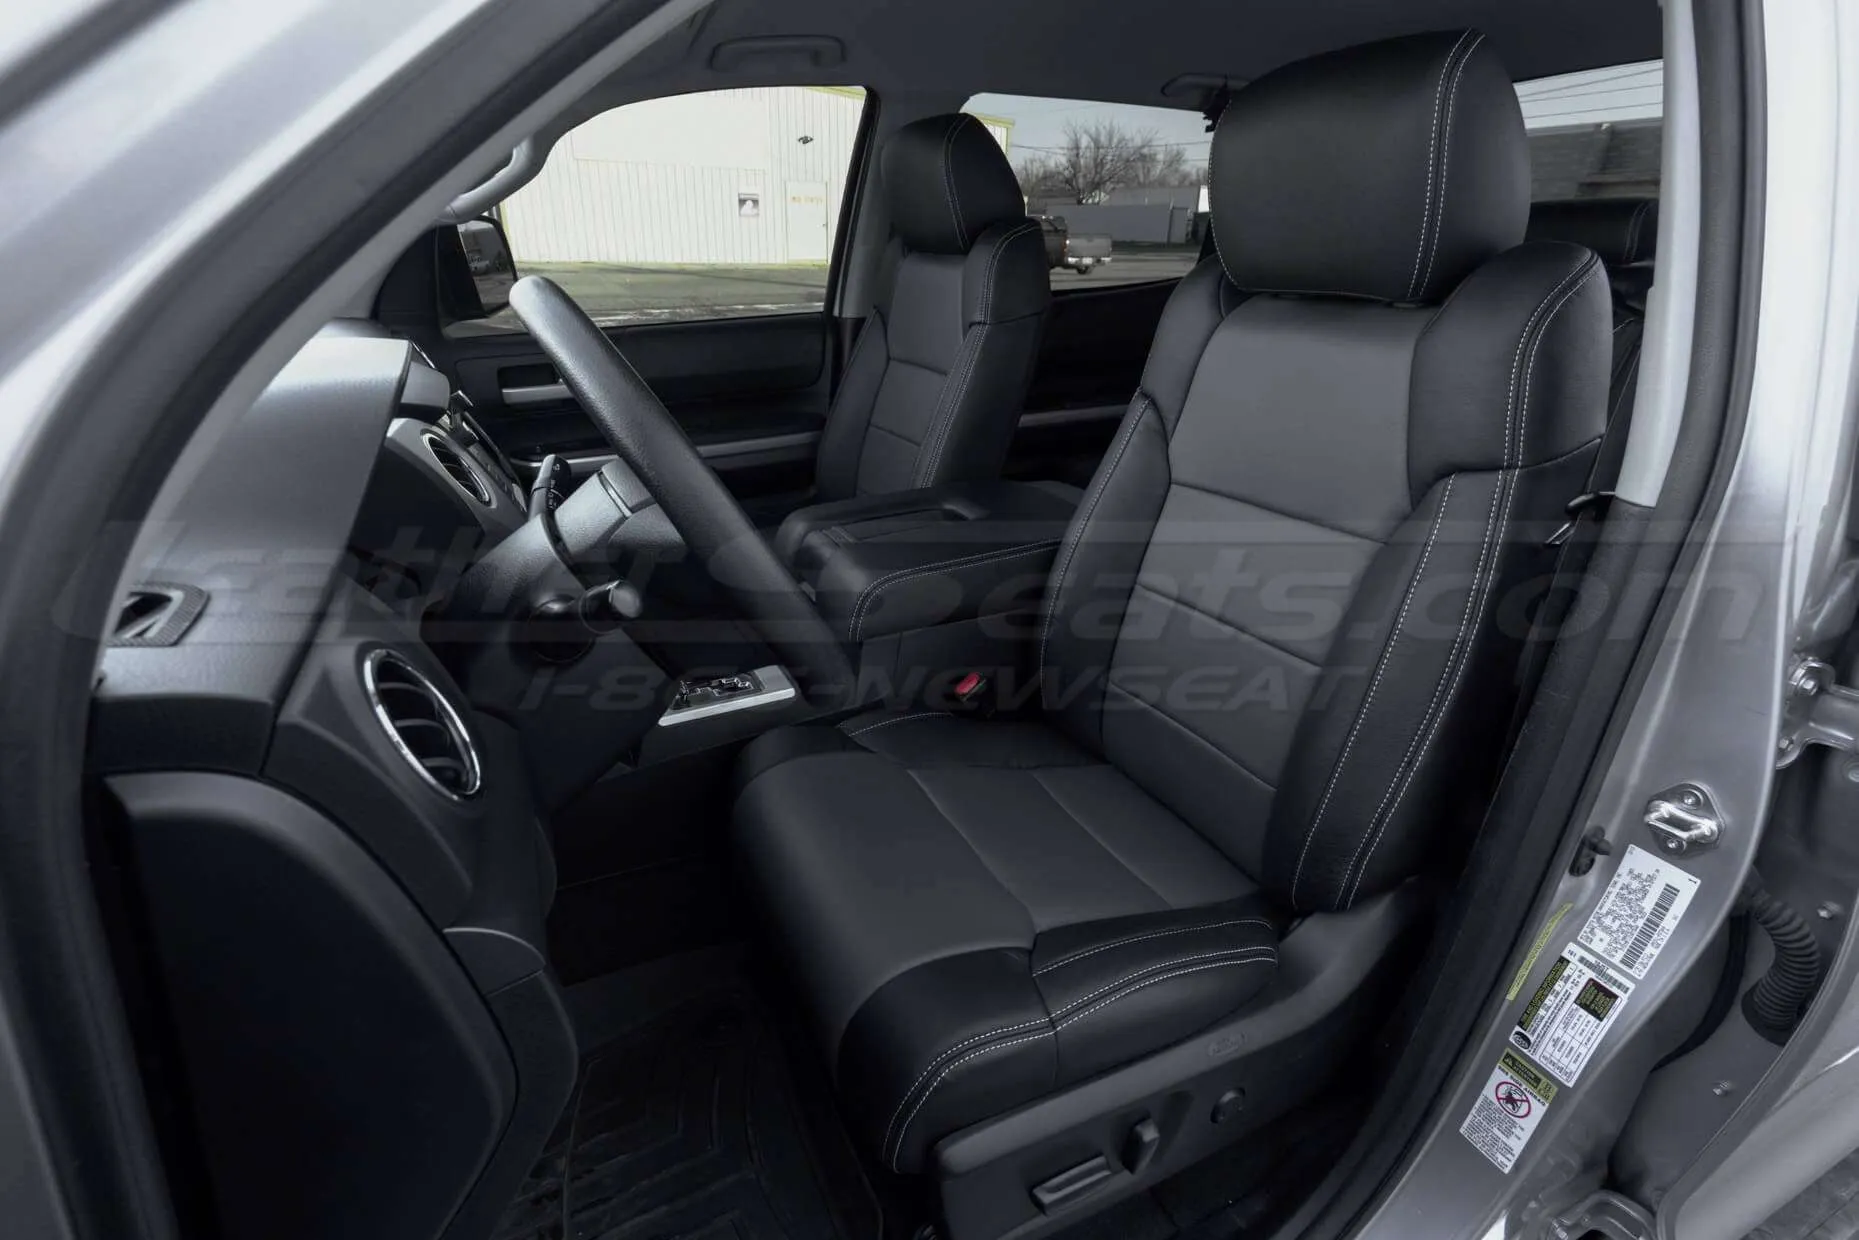 2014 Toyota Tundra CrewMax Leather Seat Kit - Black & Charcoal - Installed front driver's seat